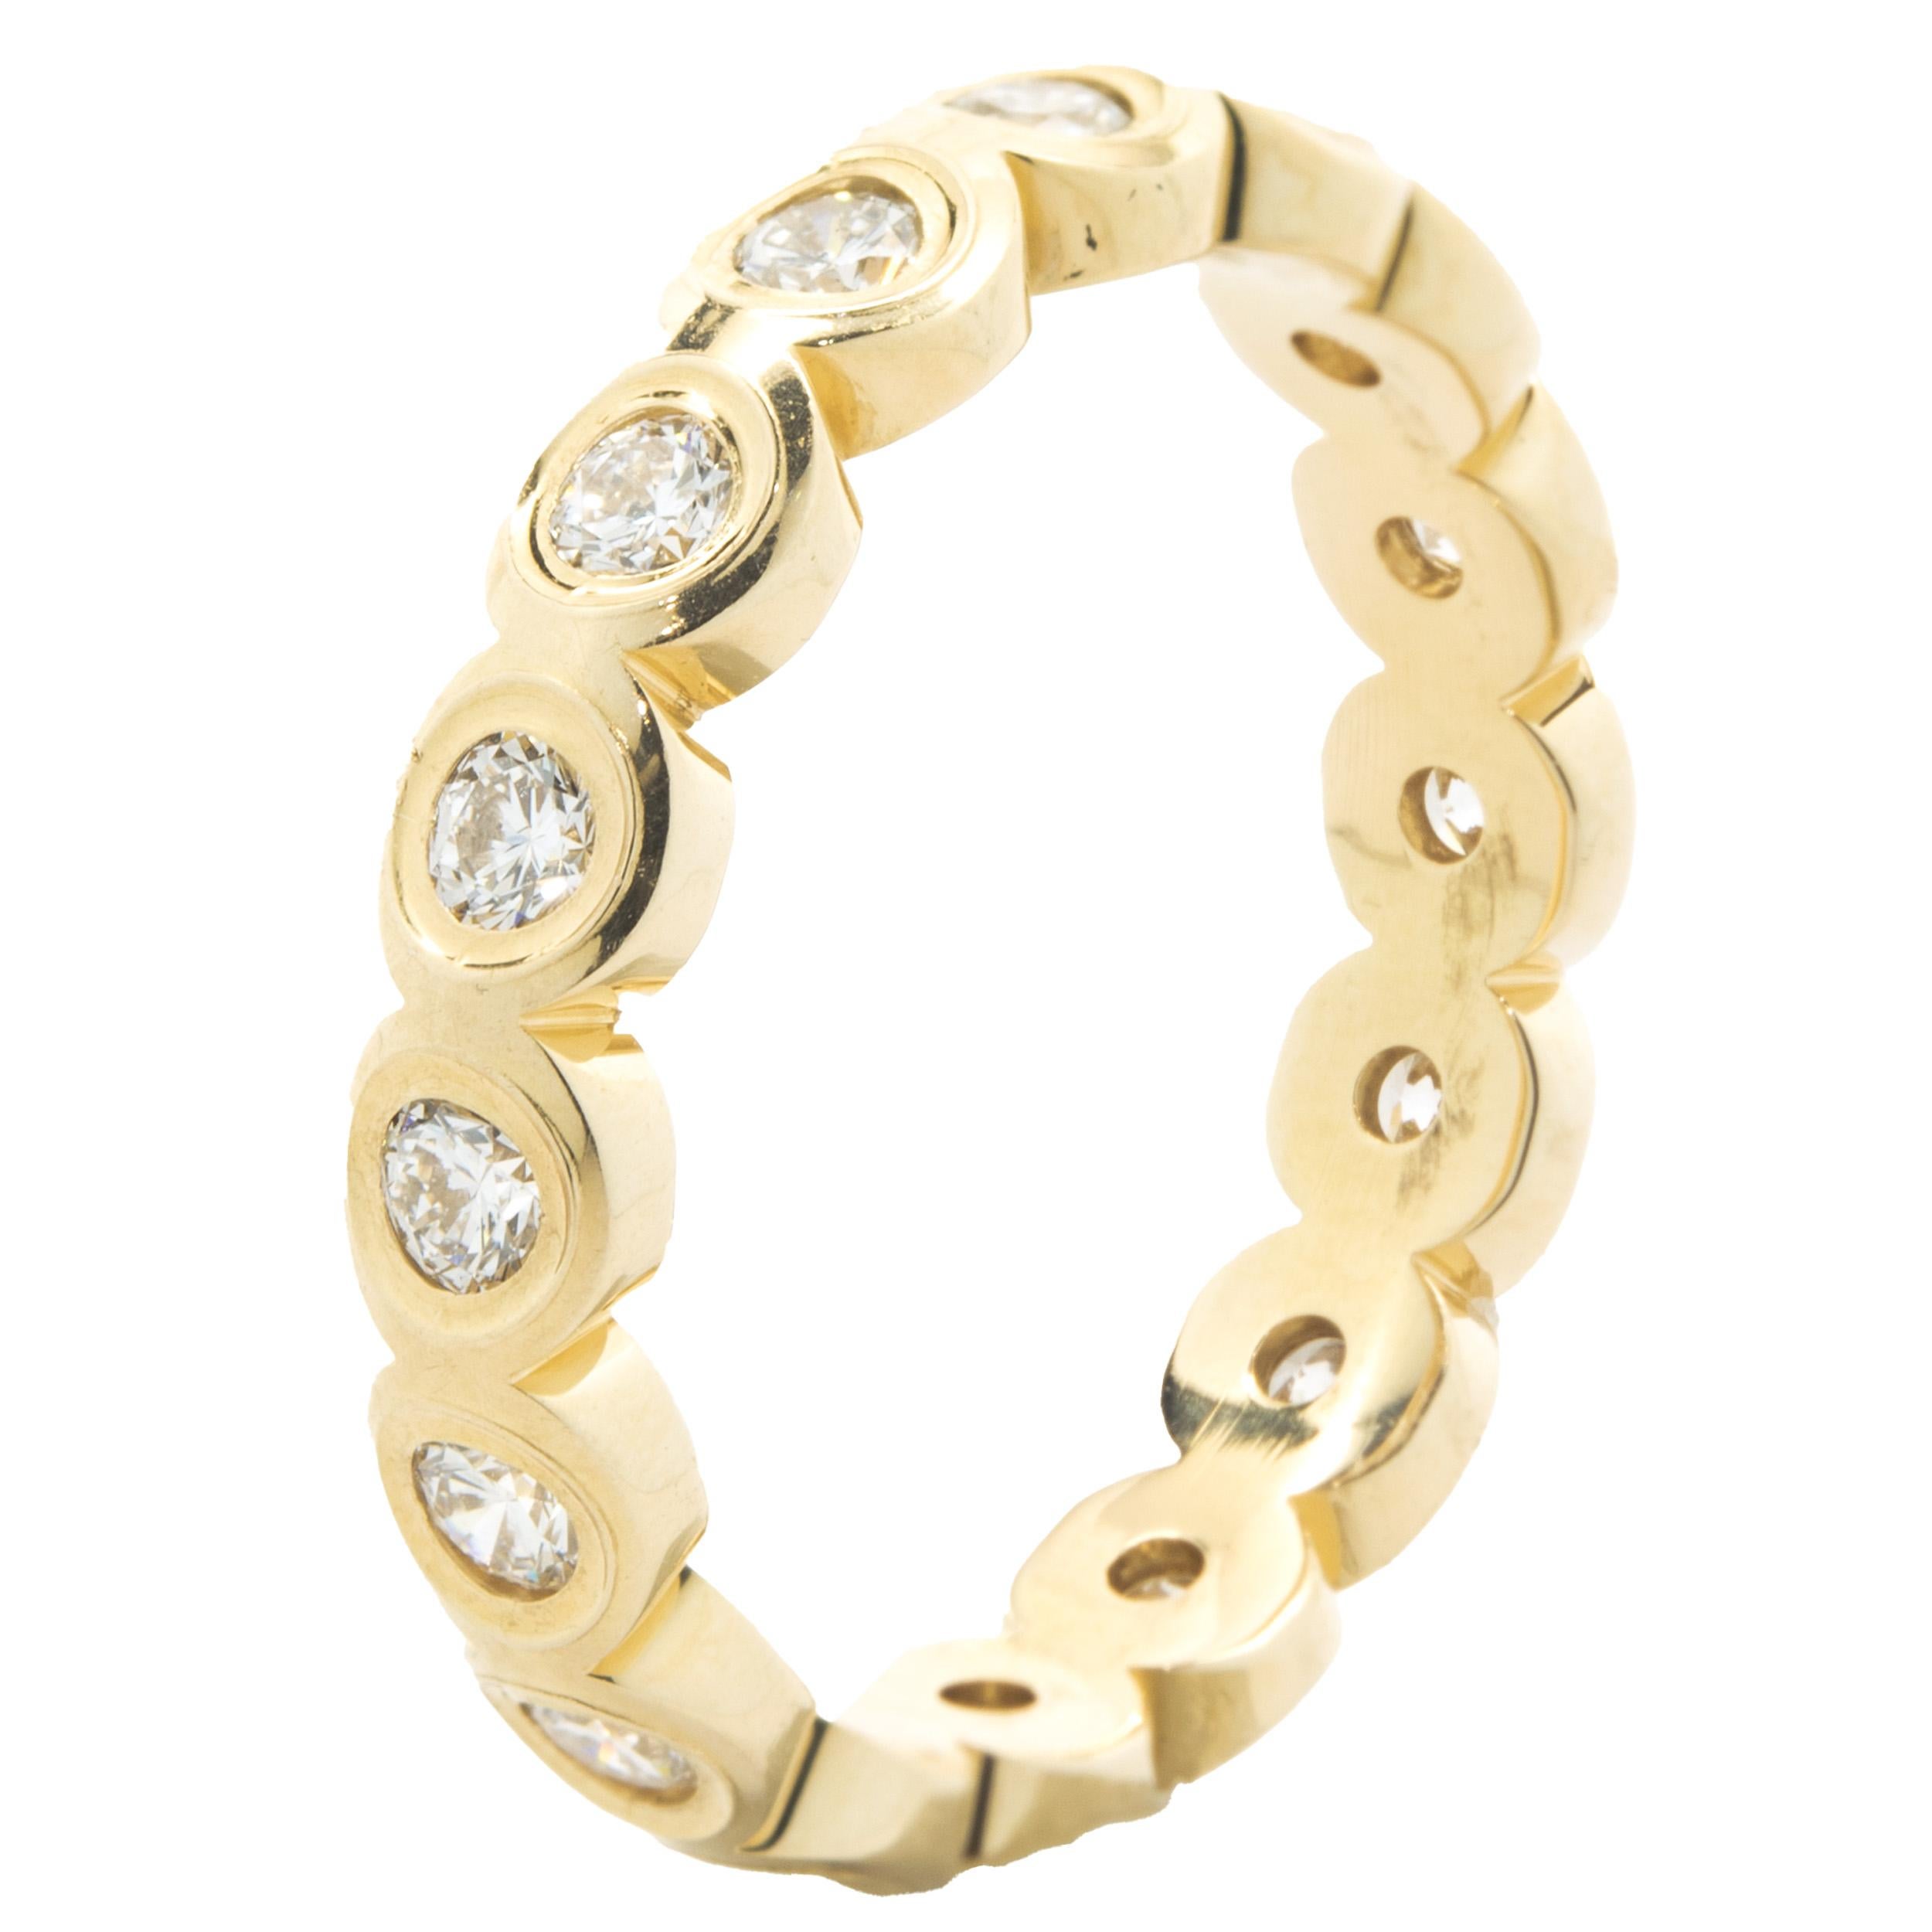 Designer: Custom
Material: 14K yellow gold
Diamonds: 16 round brilliant cut = 0.51cttw
Color: H 
Clarity: SI1
Size: 6.5
Dimensions: ring measures 4mm in width
Weight: 3.30 grams